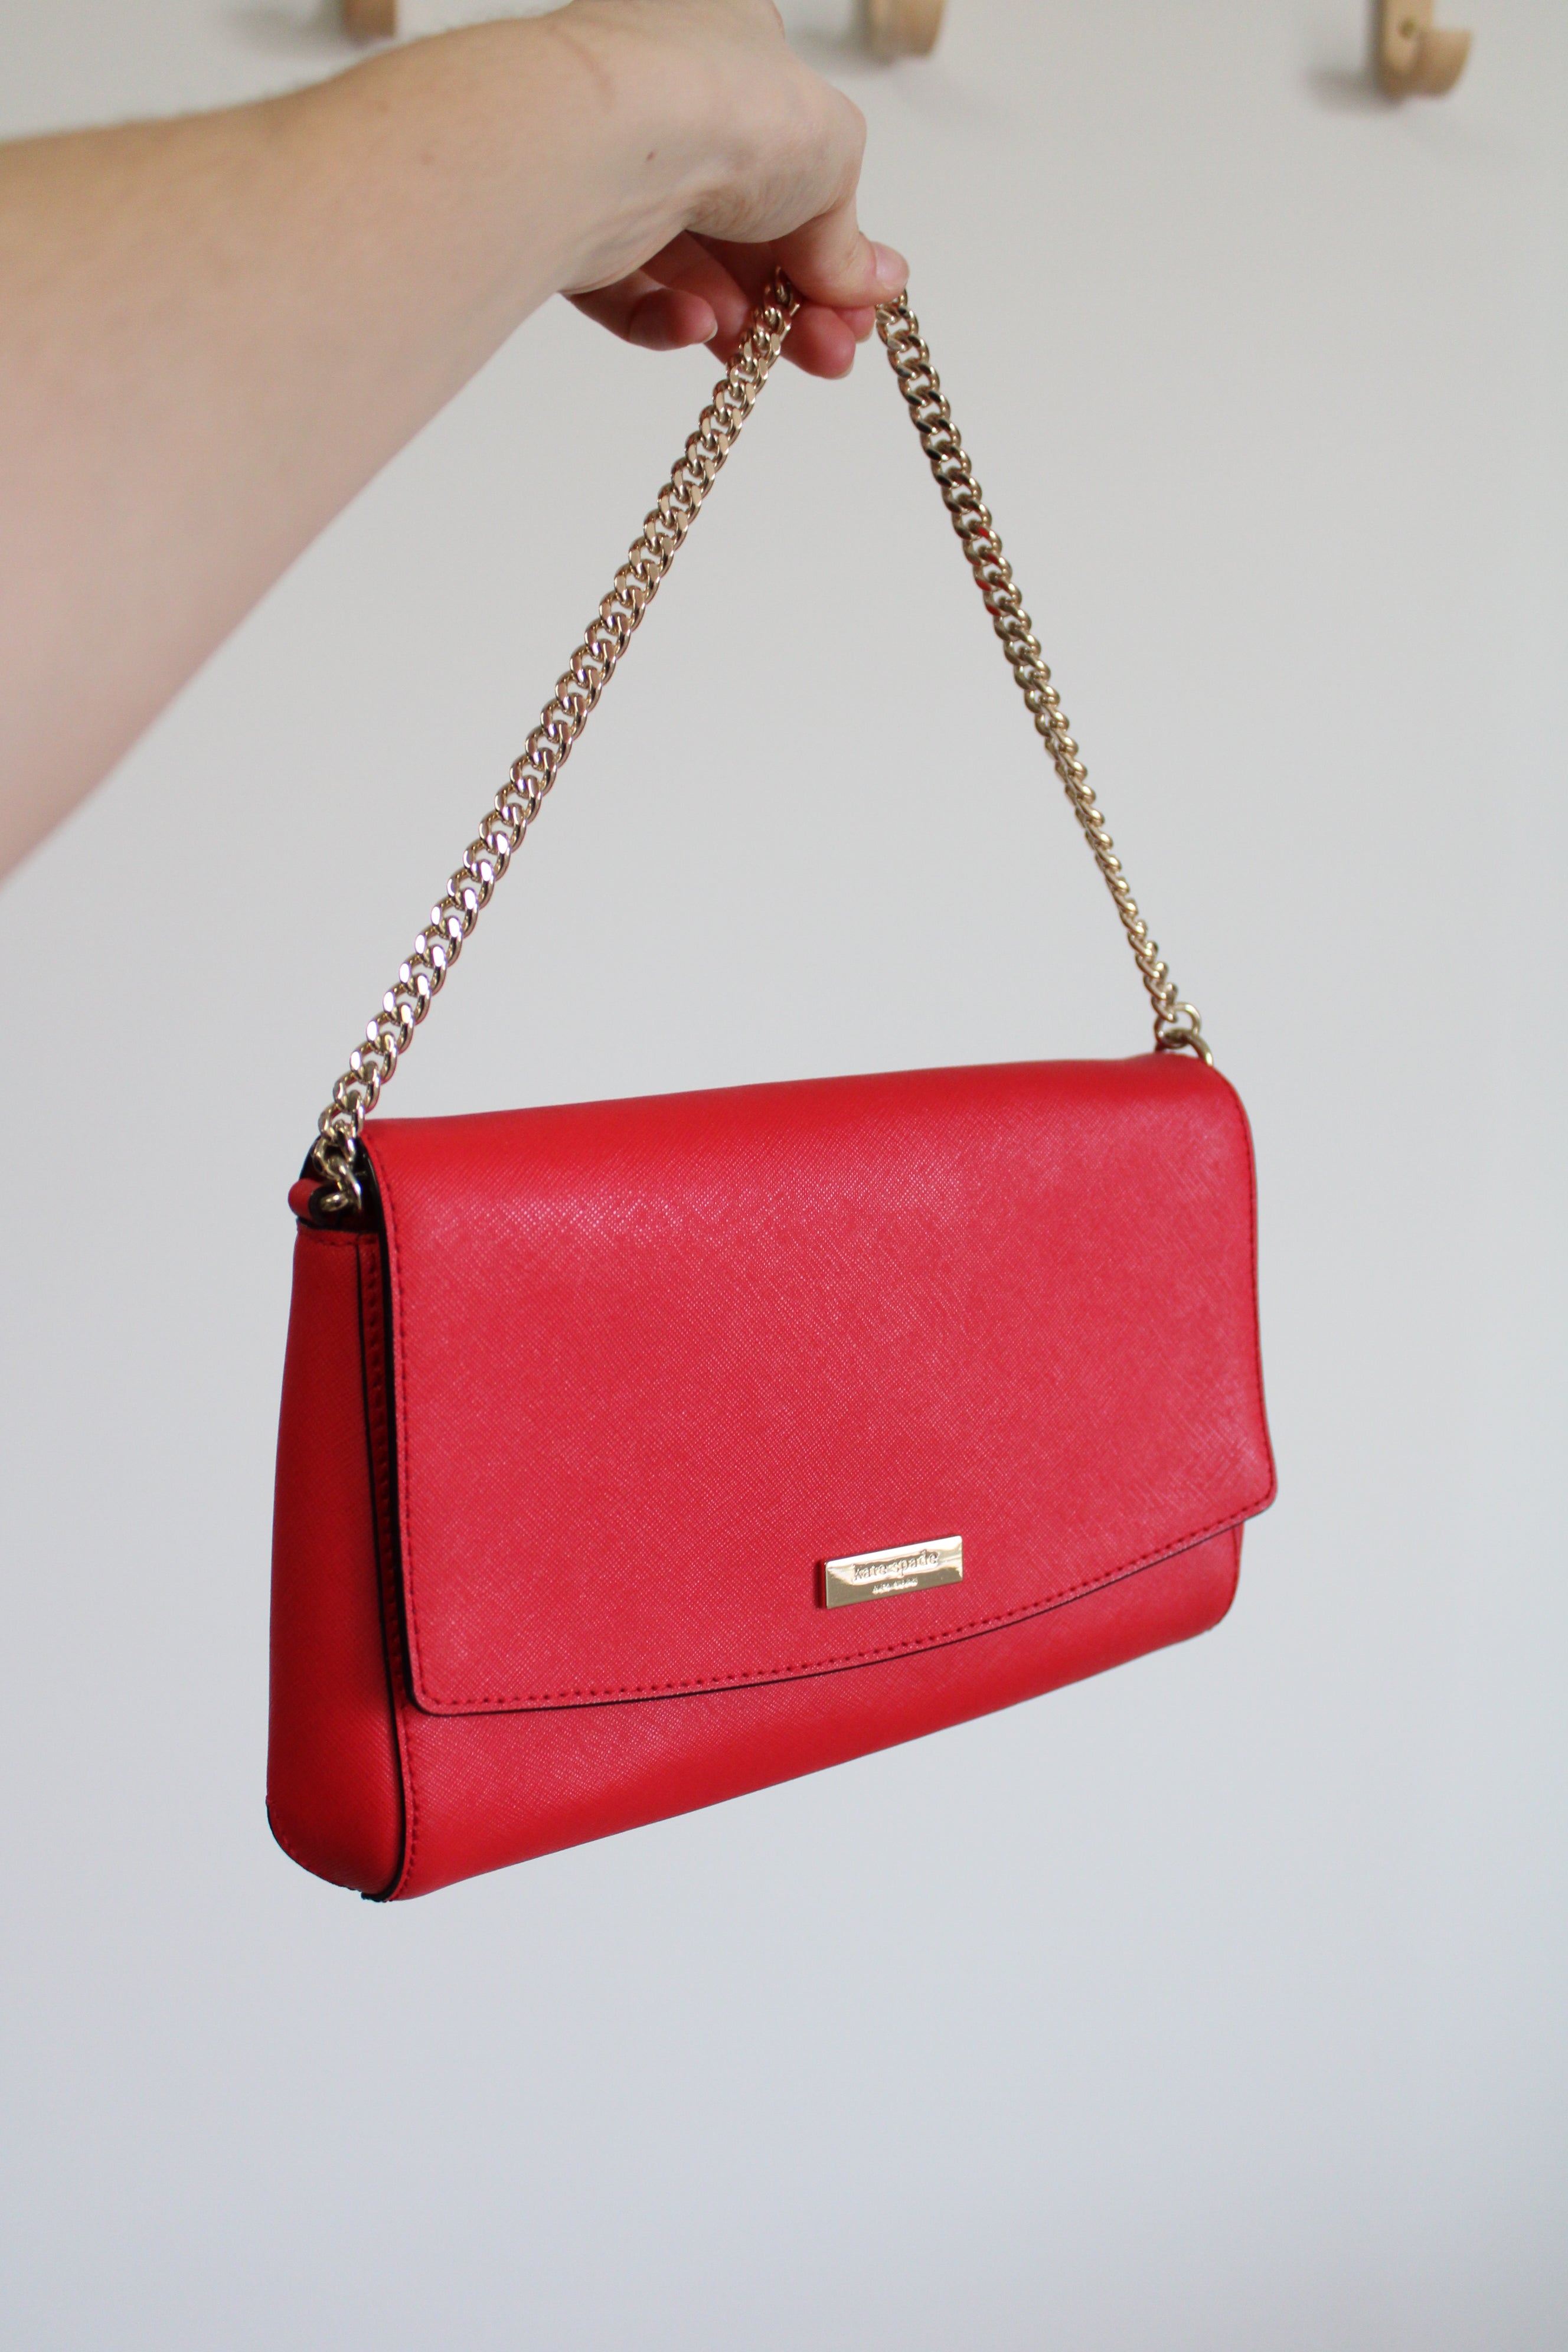 Small Pink Red Purse with Bumble Bee Enbellishment